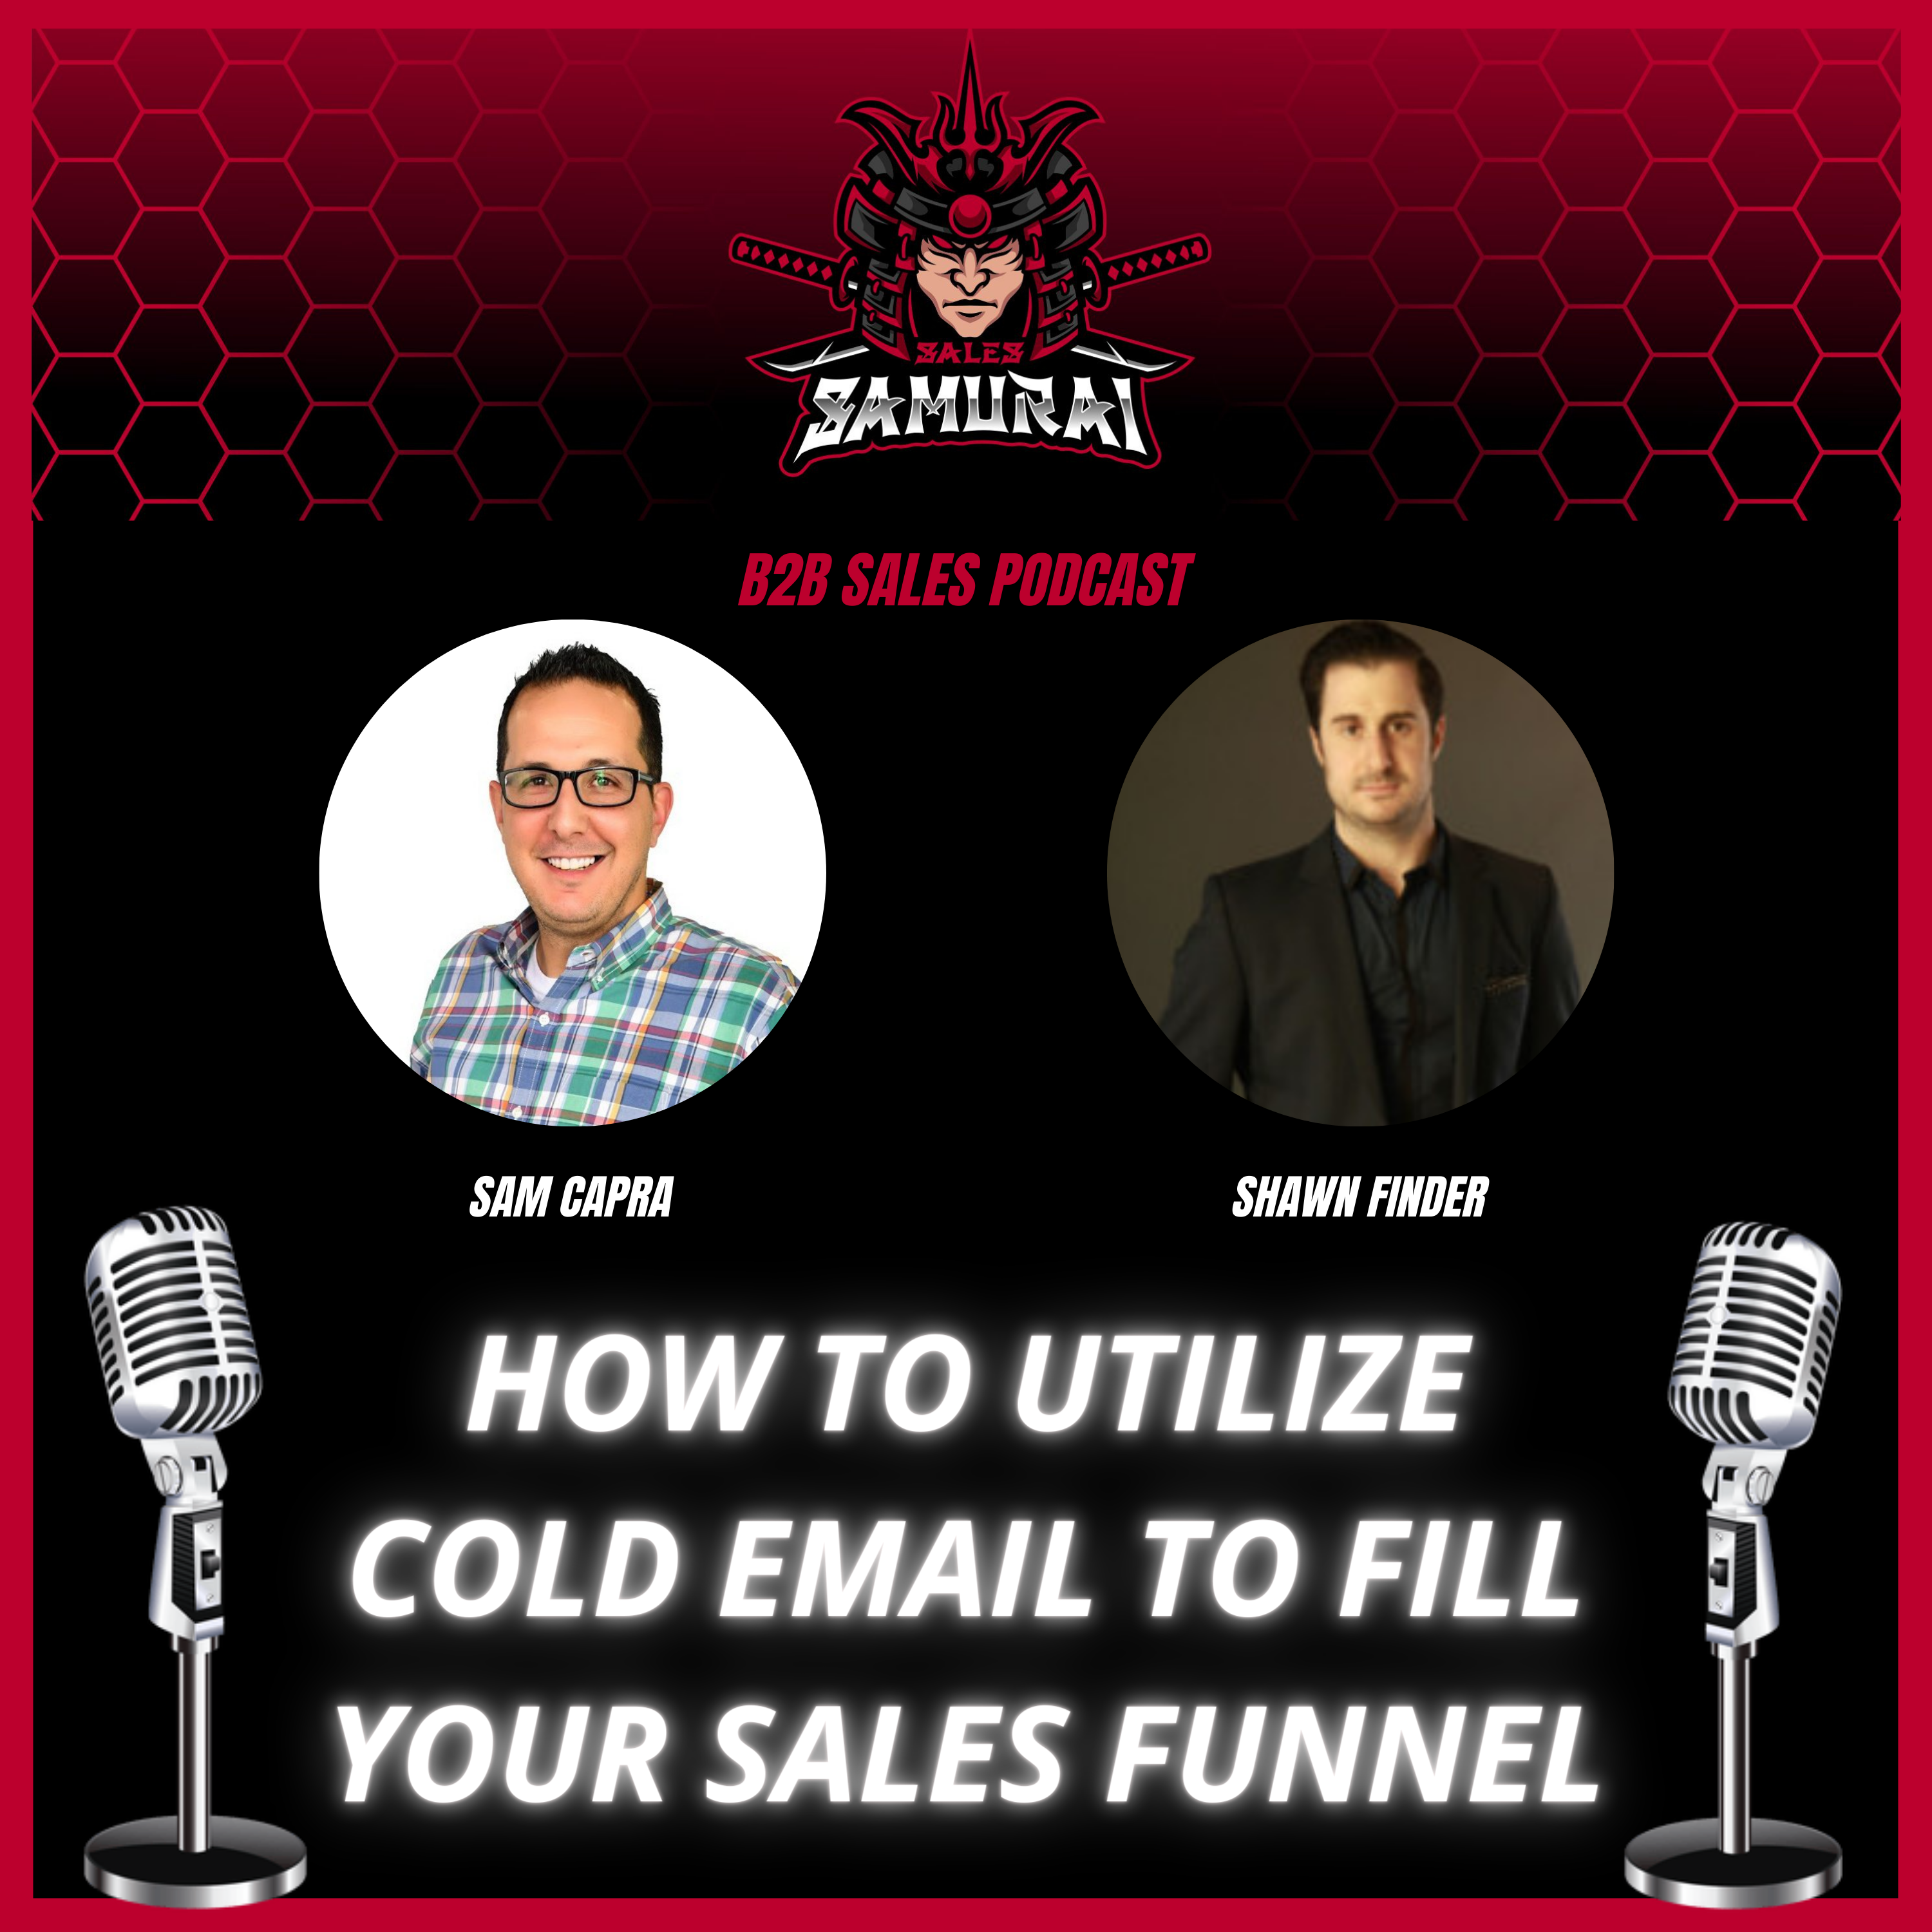 How to Utilize Cold Email to Fill Your Sales Funnel